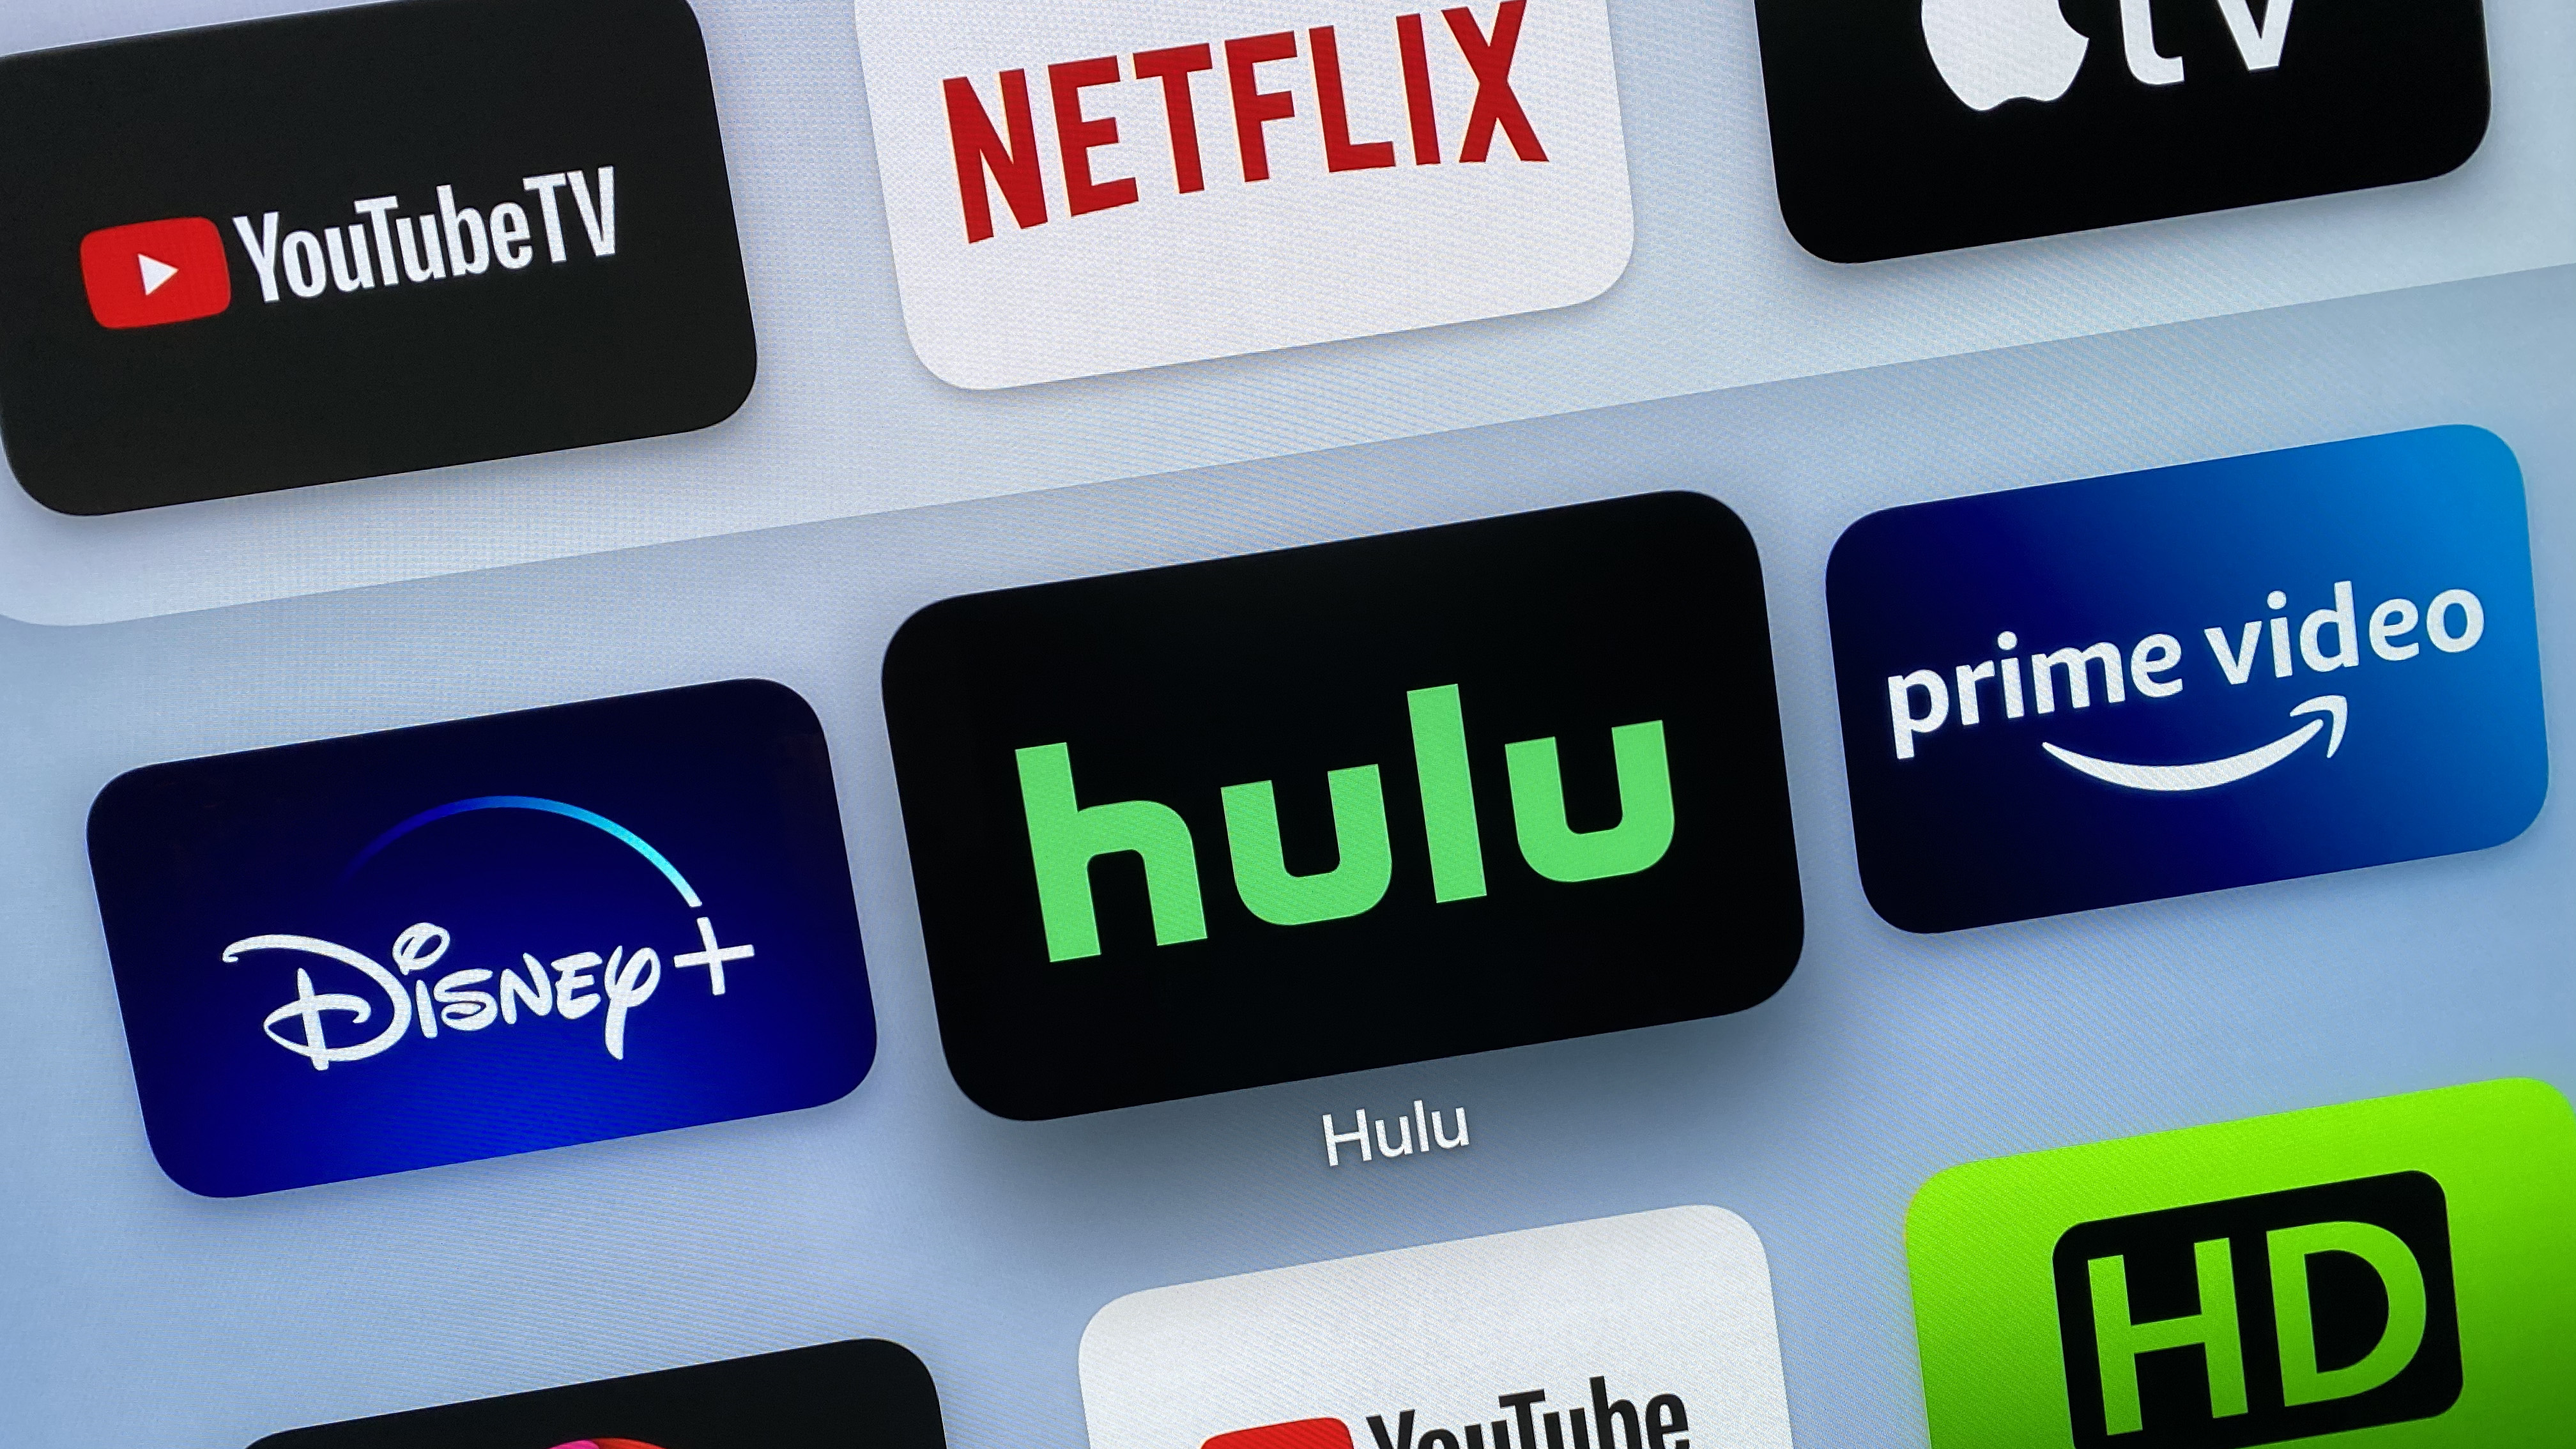 TV vs. Hulu + Live TV: What's the Difference?